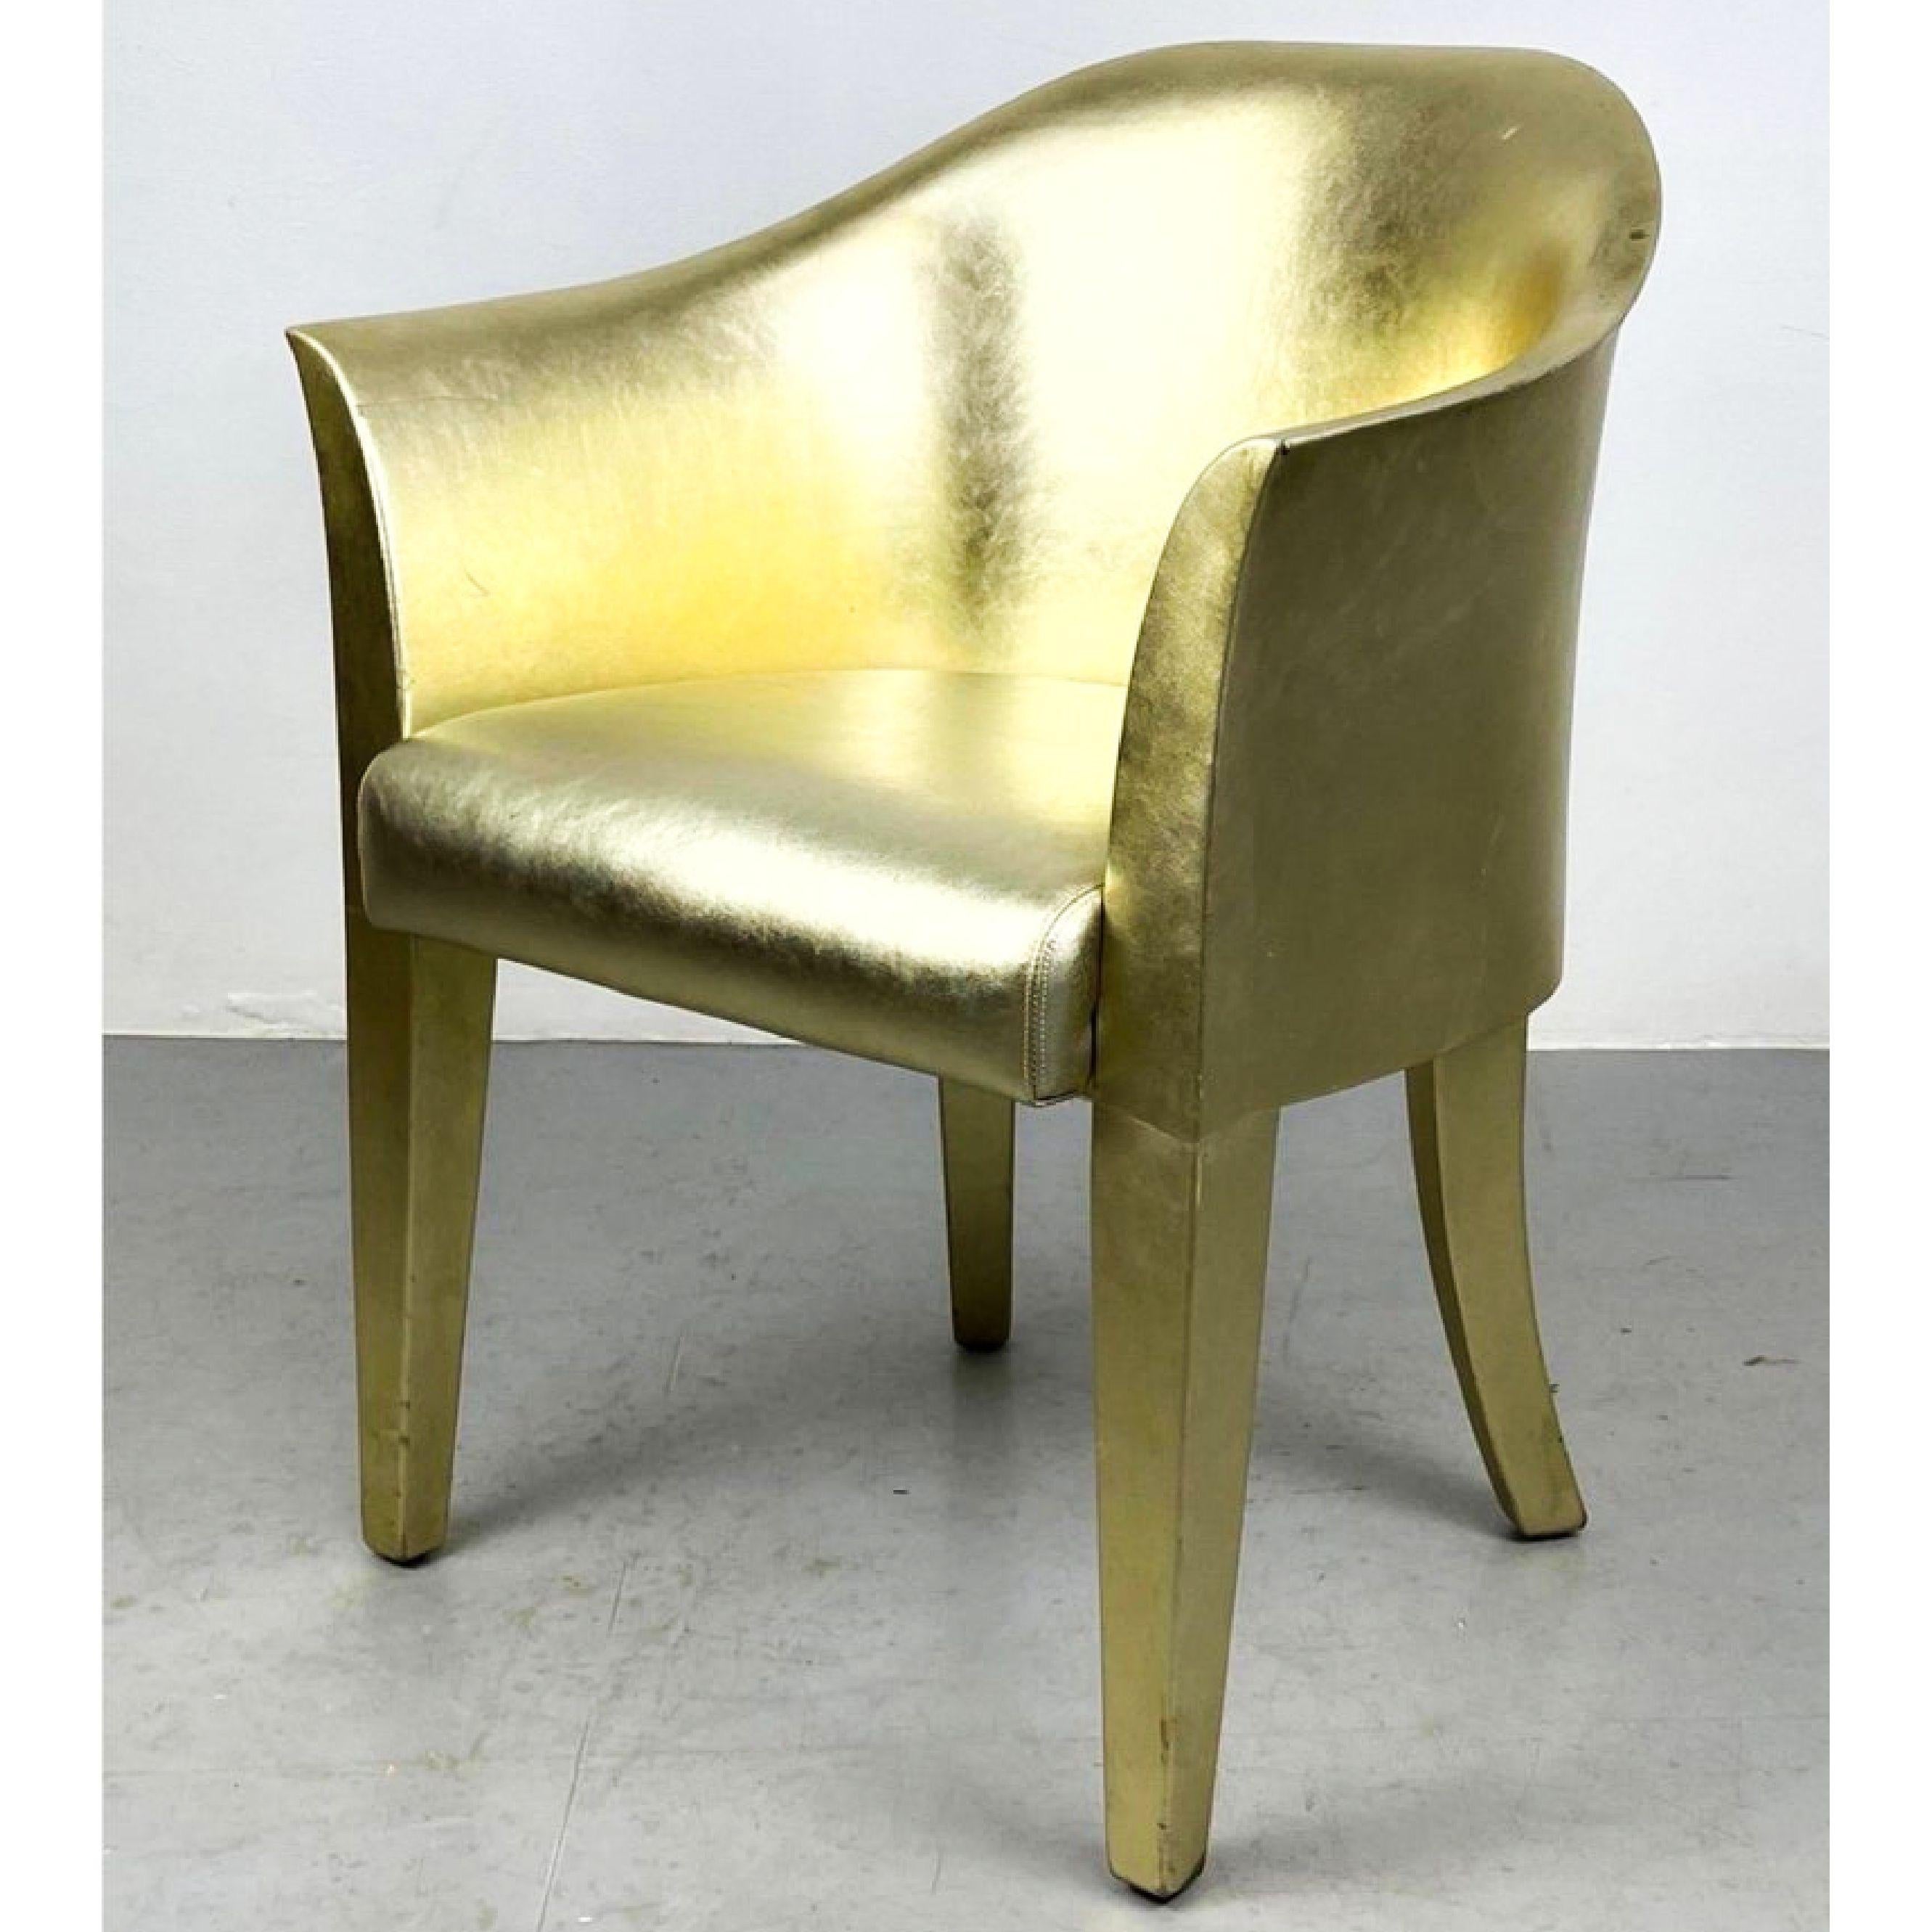 Karl Springer Gilt Leather Tulip Armchair Lounge Chair, Signed, 1991, Gold, USA. For Sale 1